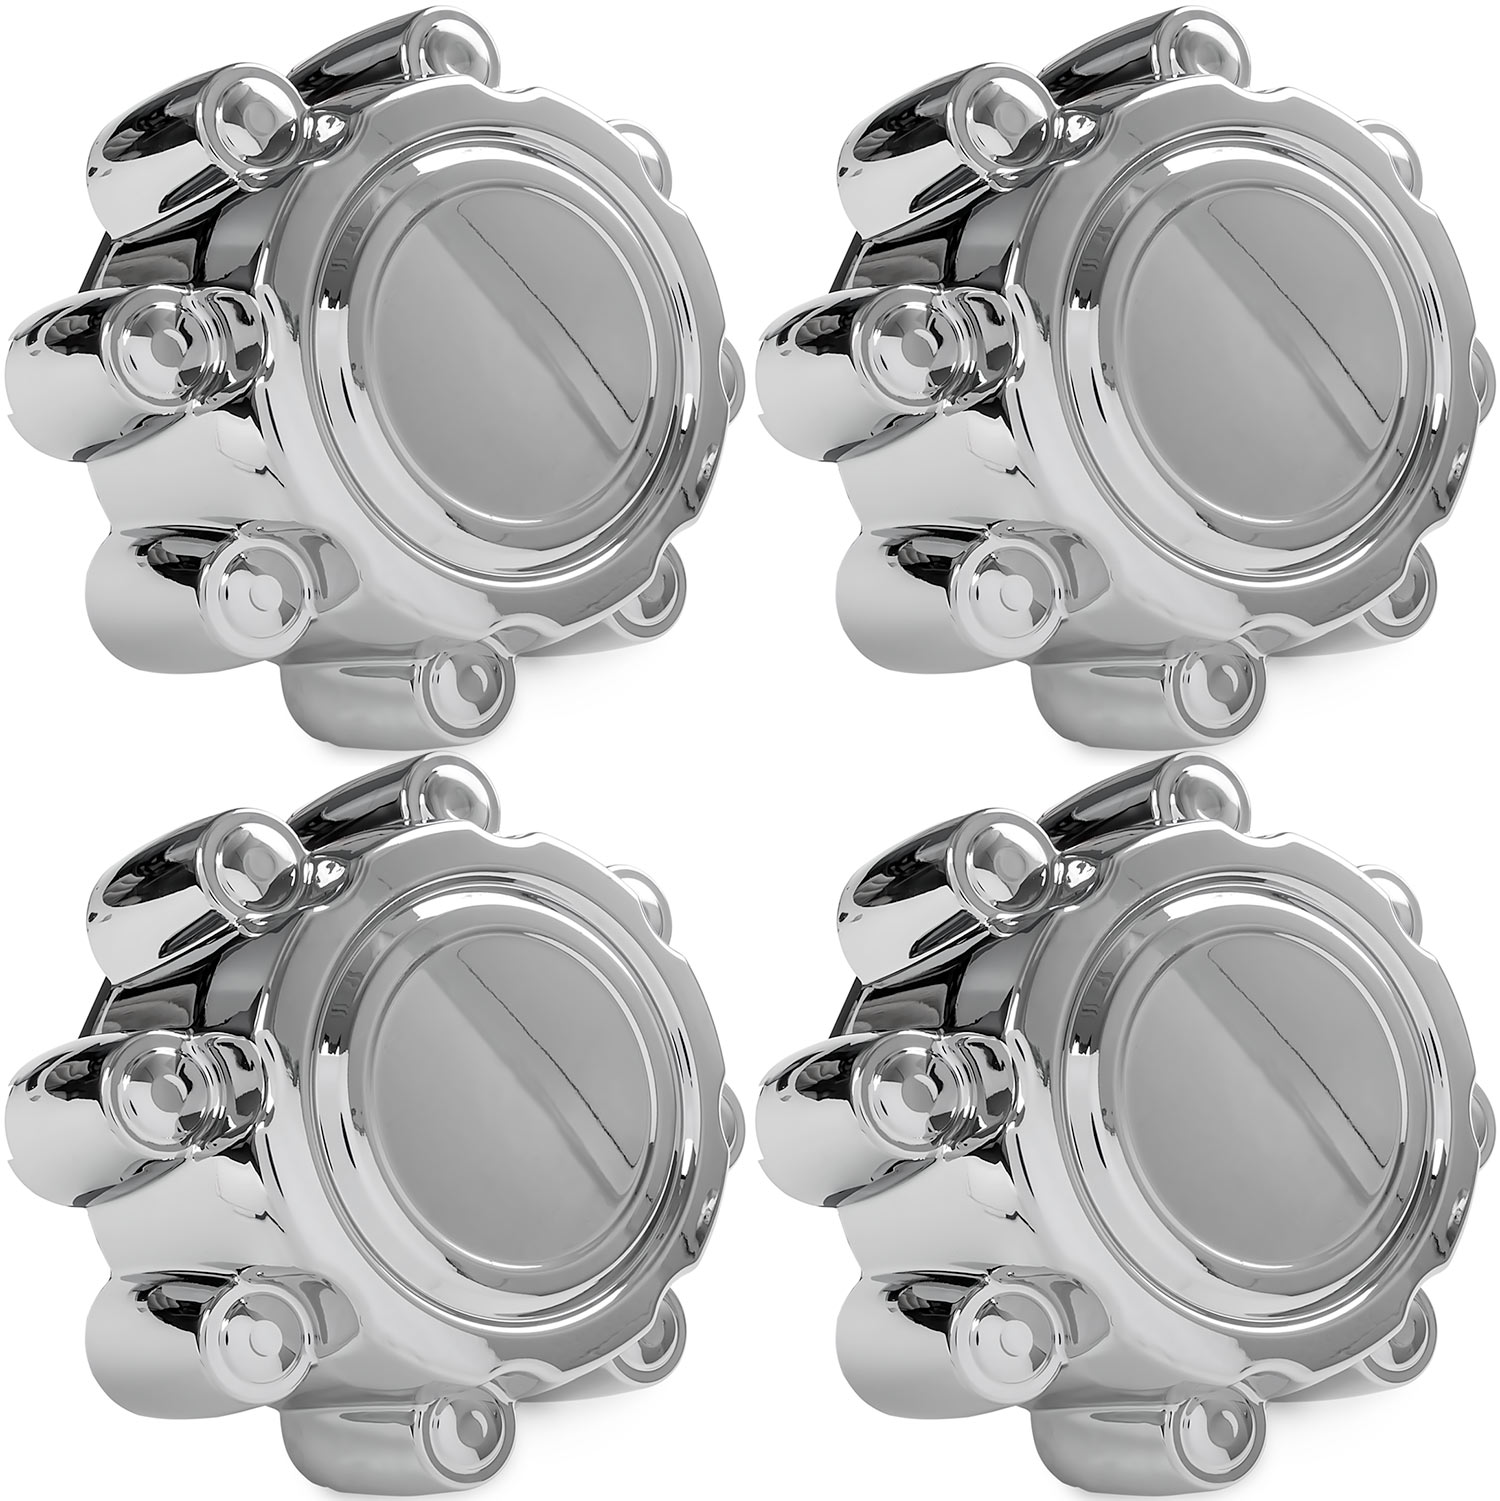 Krator 4x Chrome Center Caps Wheel Lug Nut Hub Cap Covers Compatible with 1999-2005 Ford F250